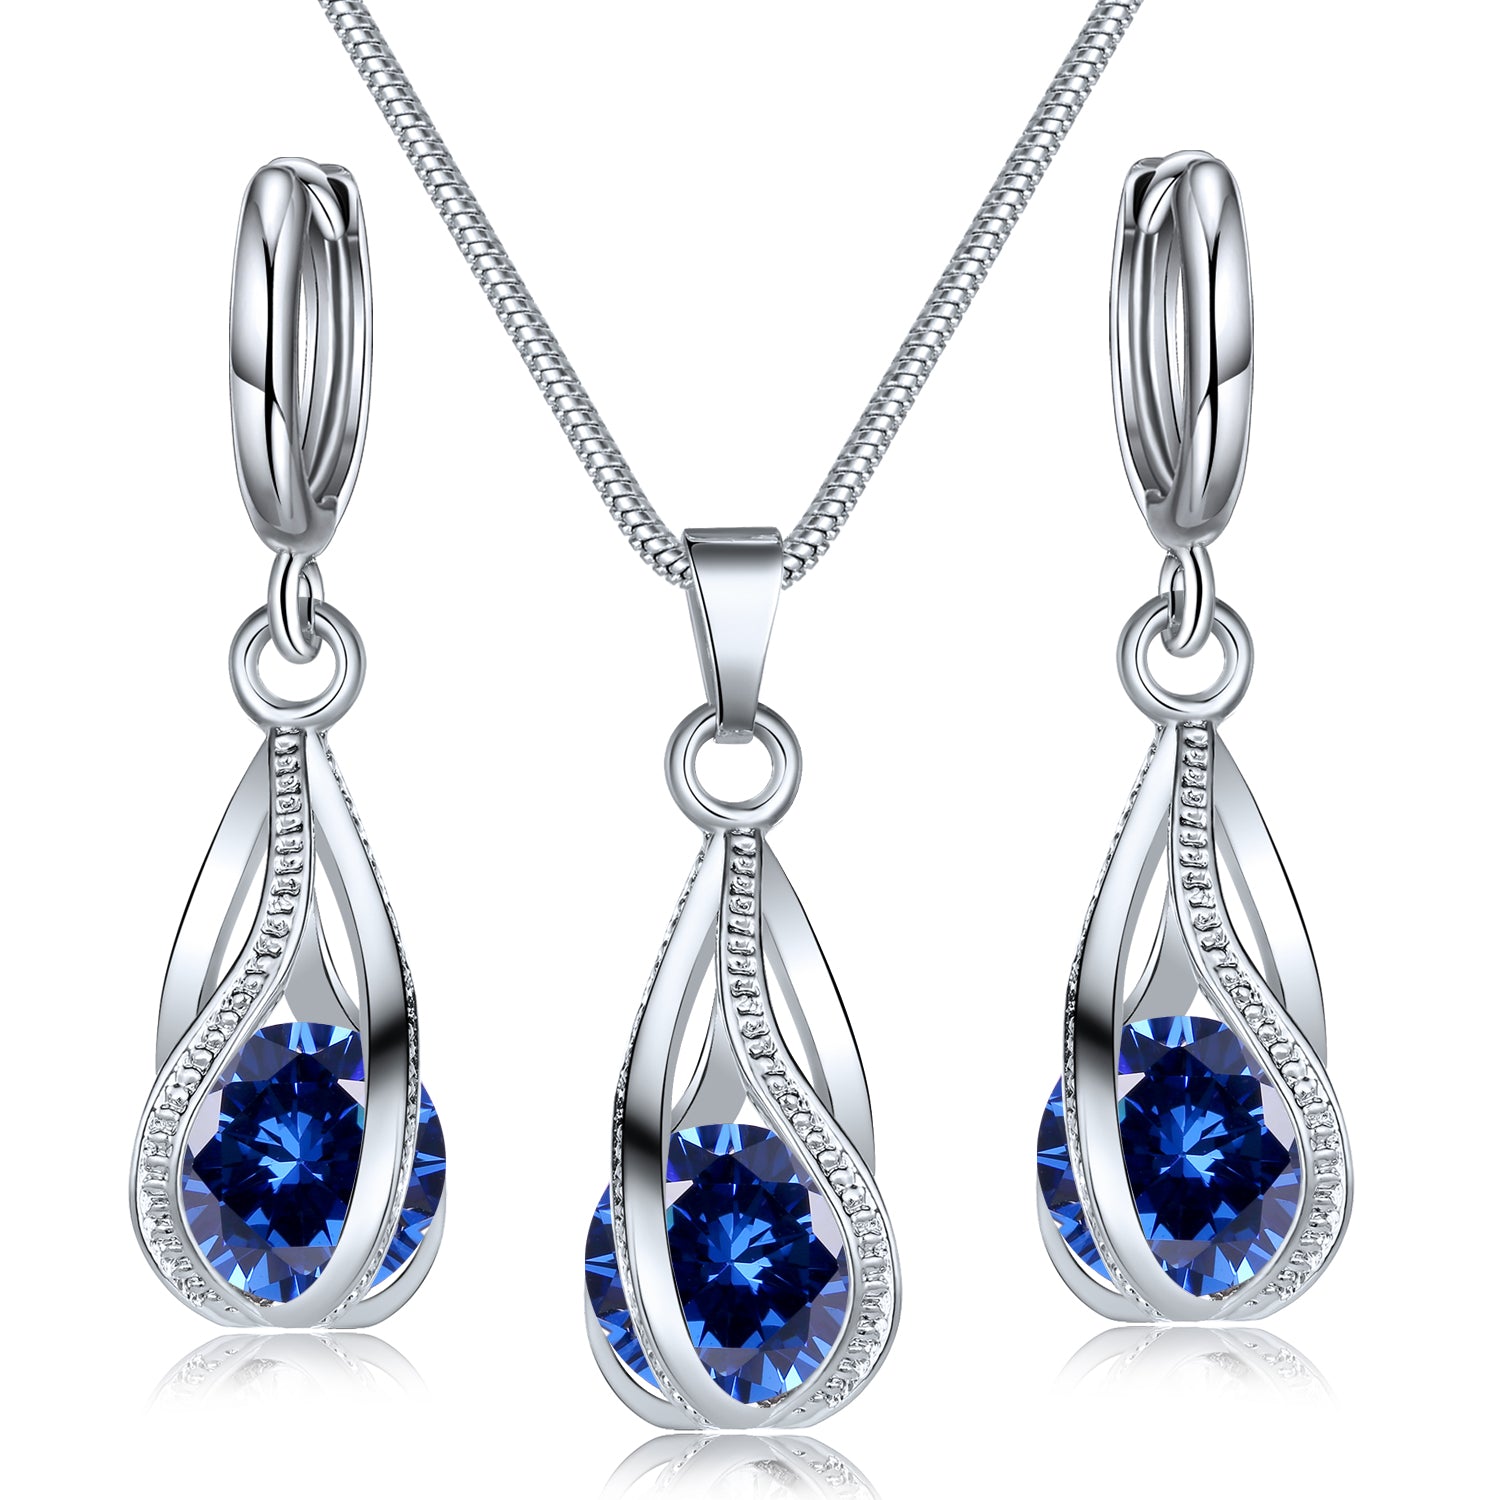 Shine Bright Like a Diamond with our 3-Piece Faux Crystal Earrings and Necklace Set